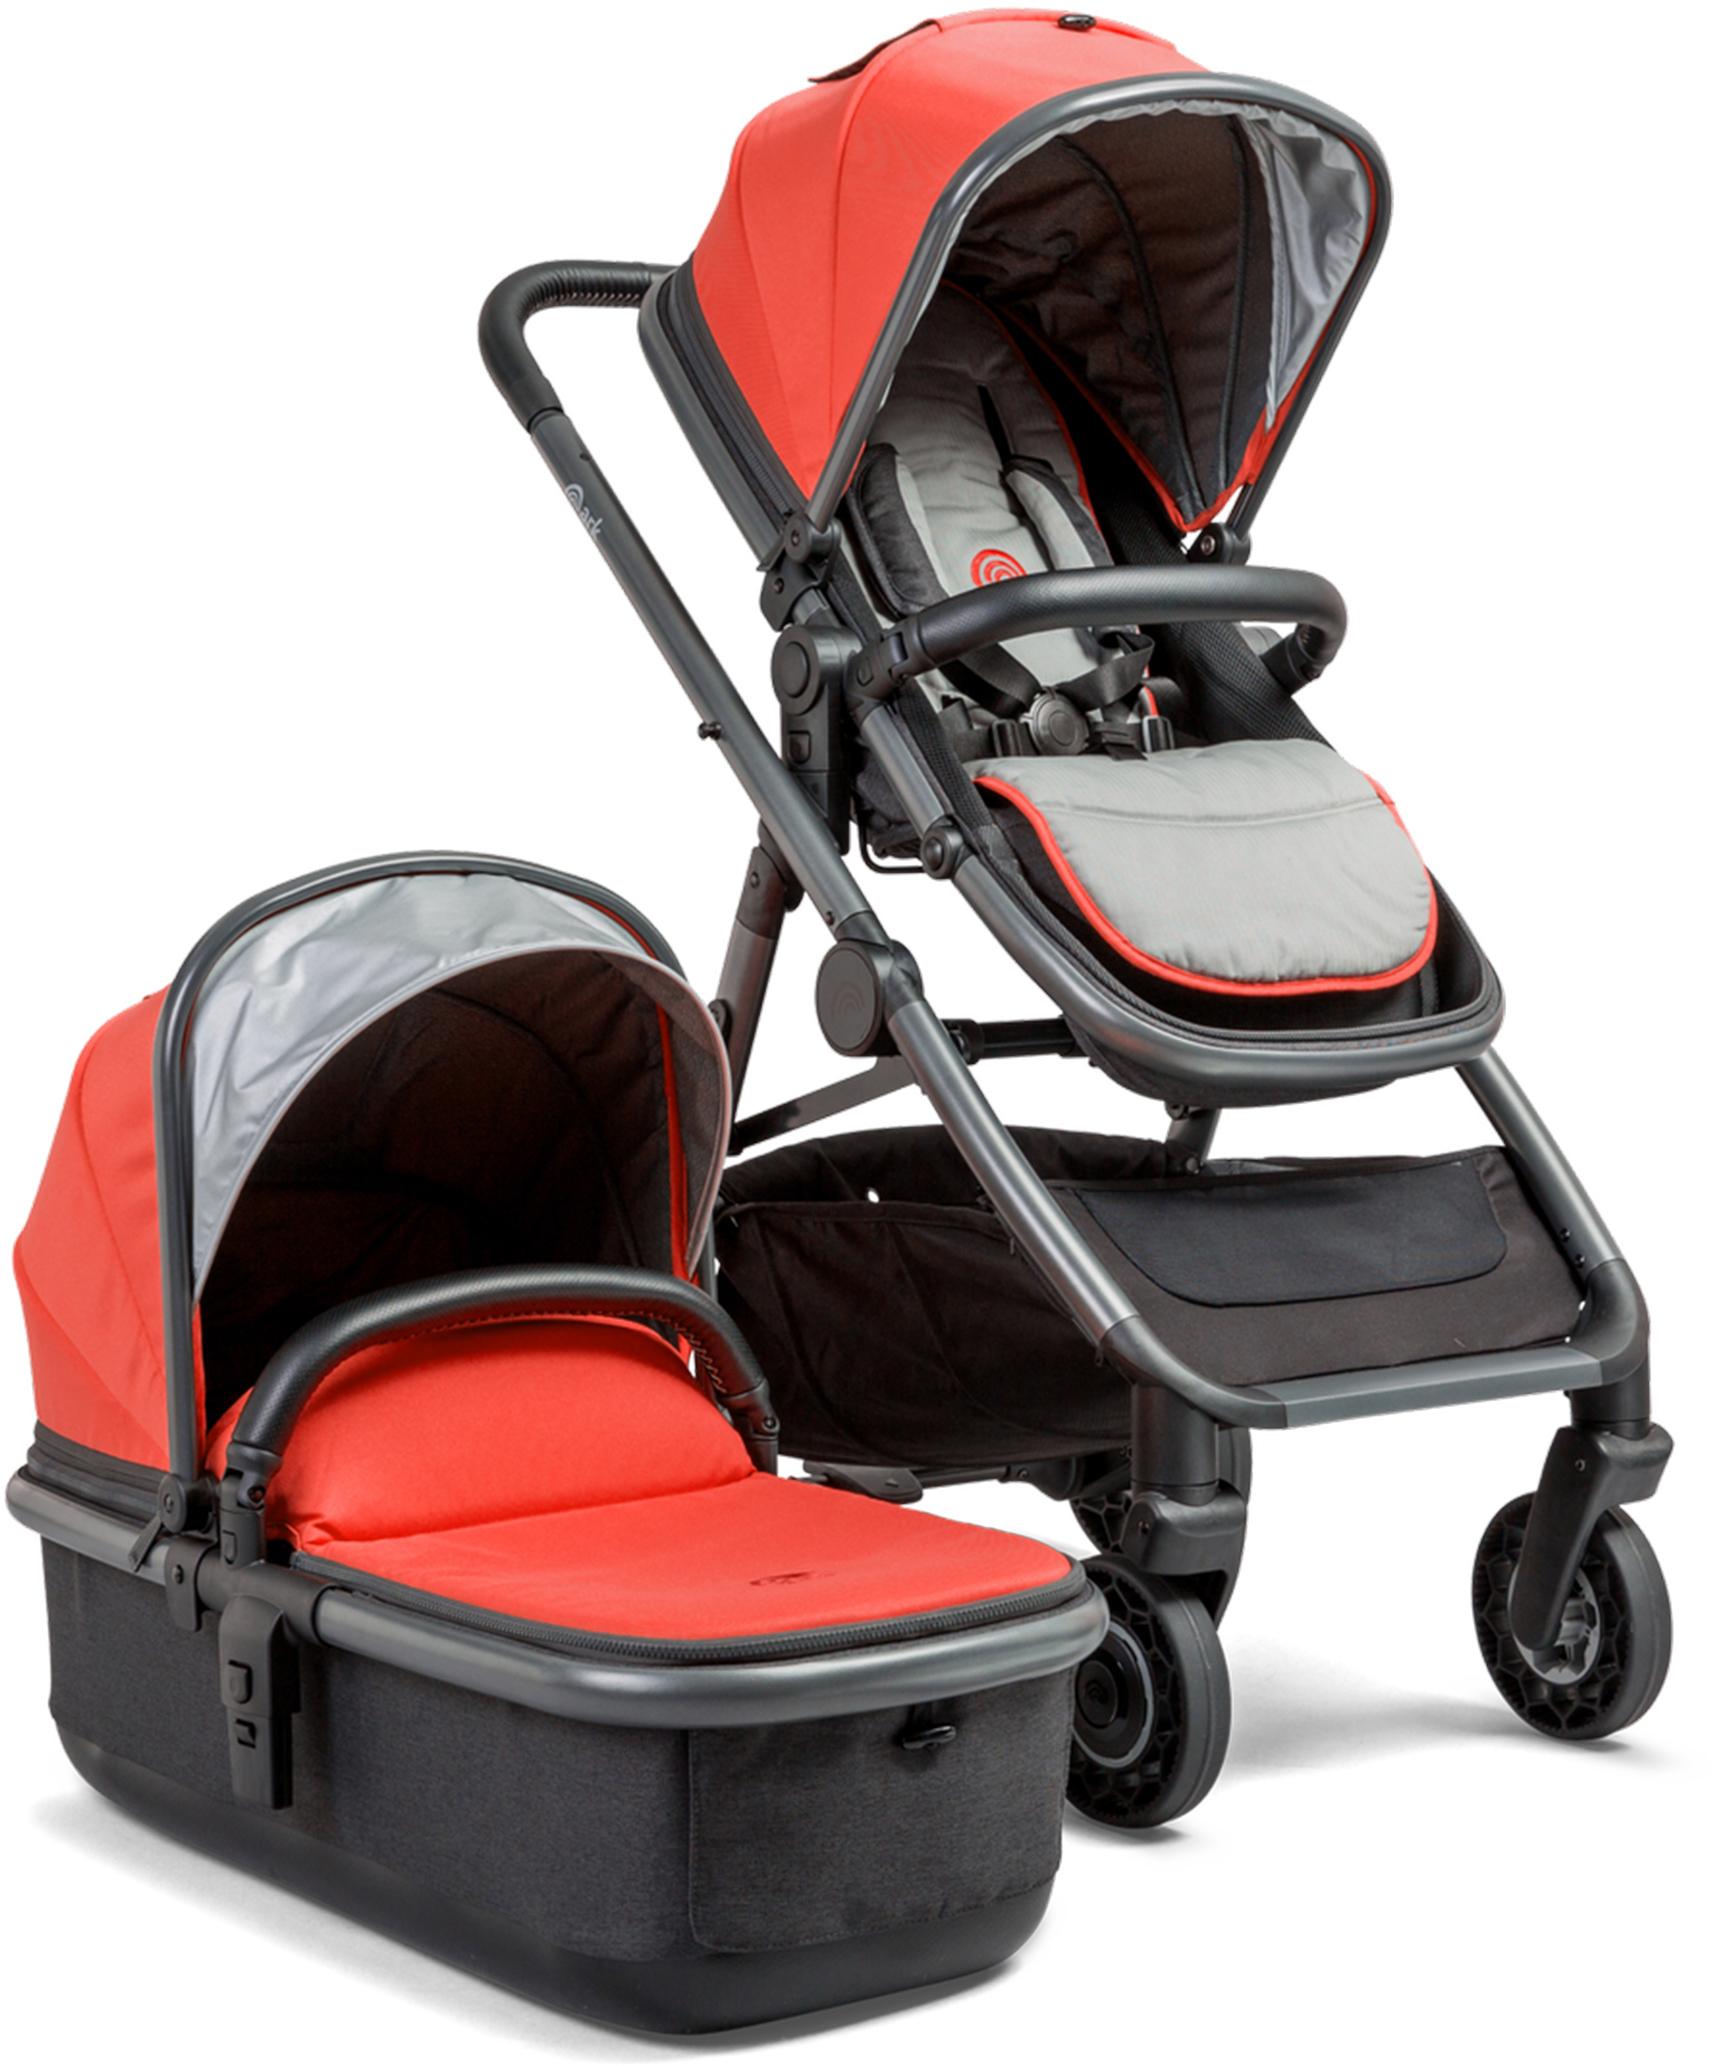 Ark 3-In-1 Travel System - Coral